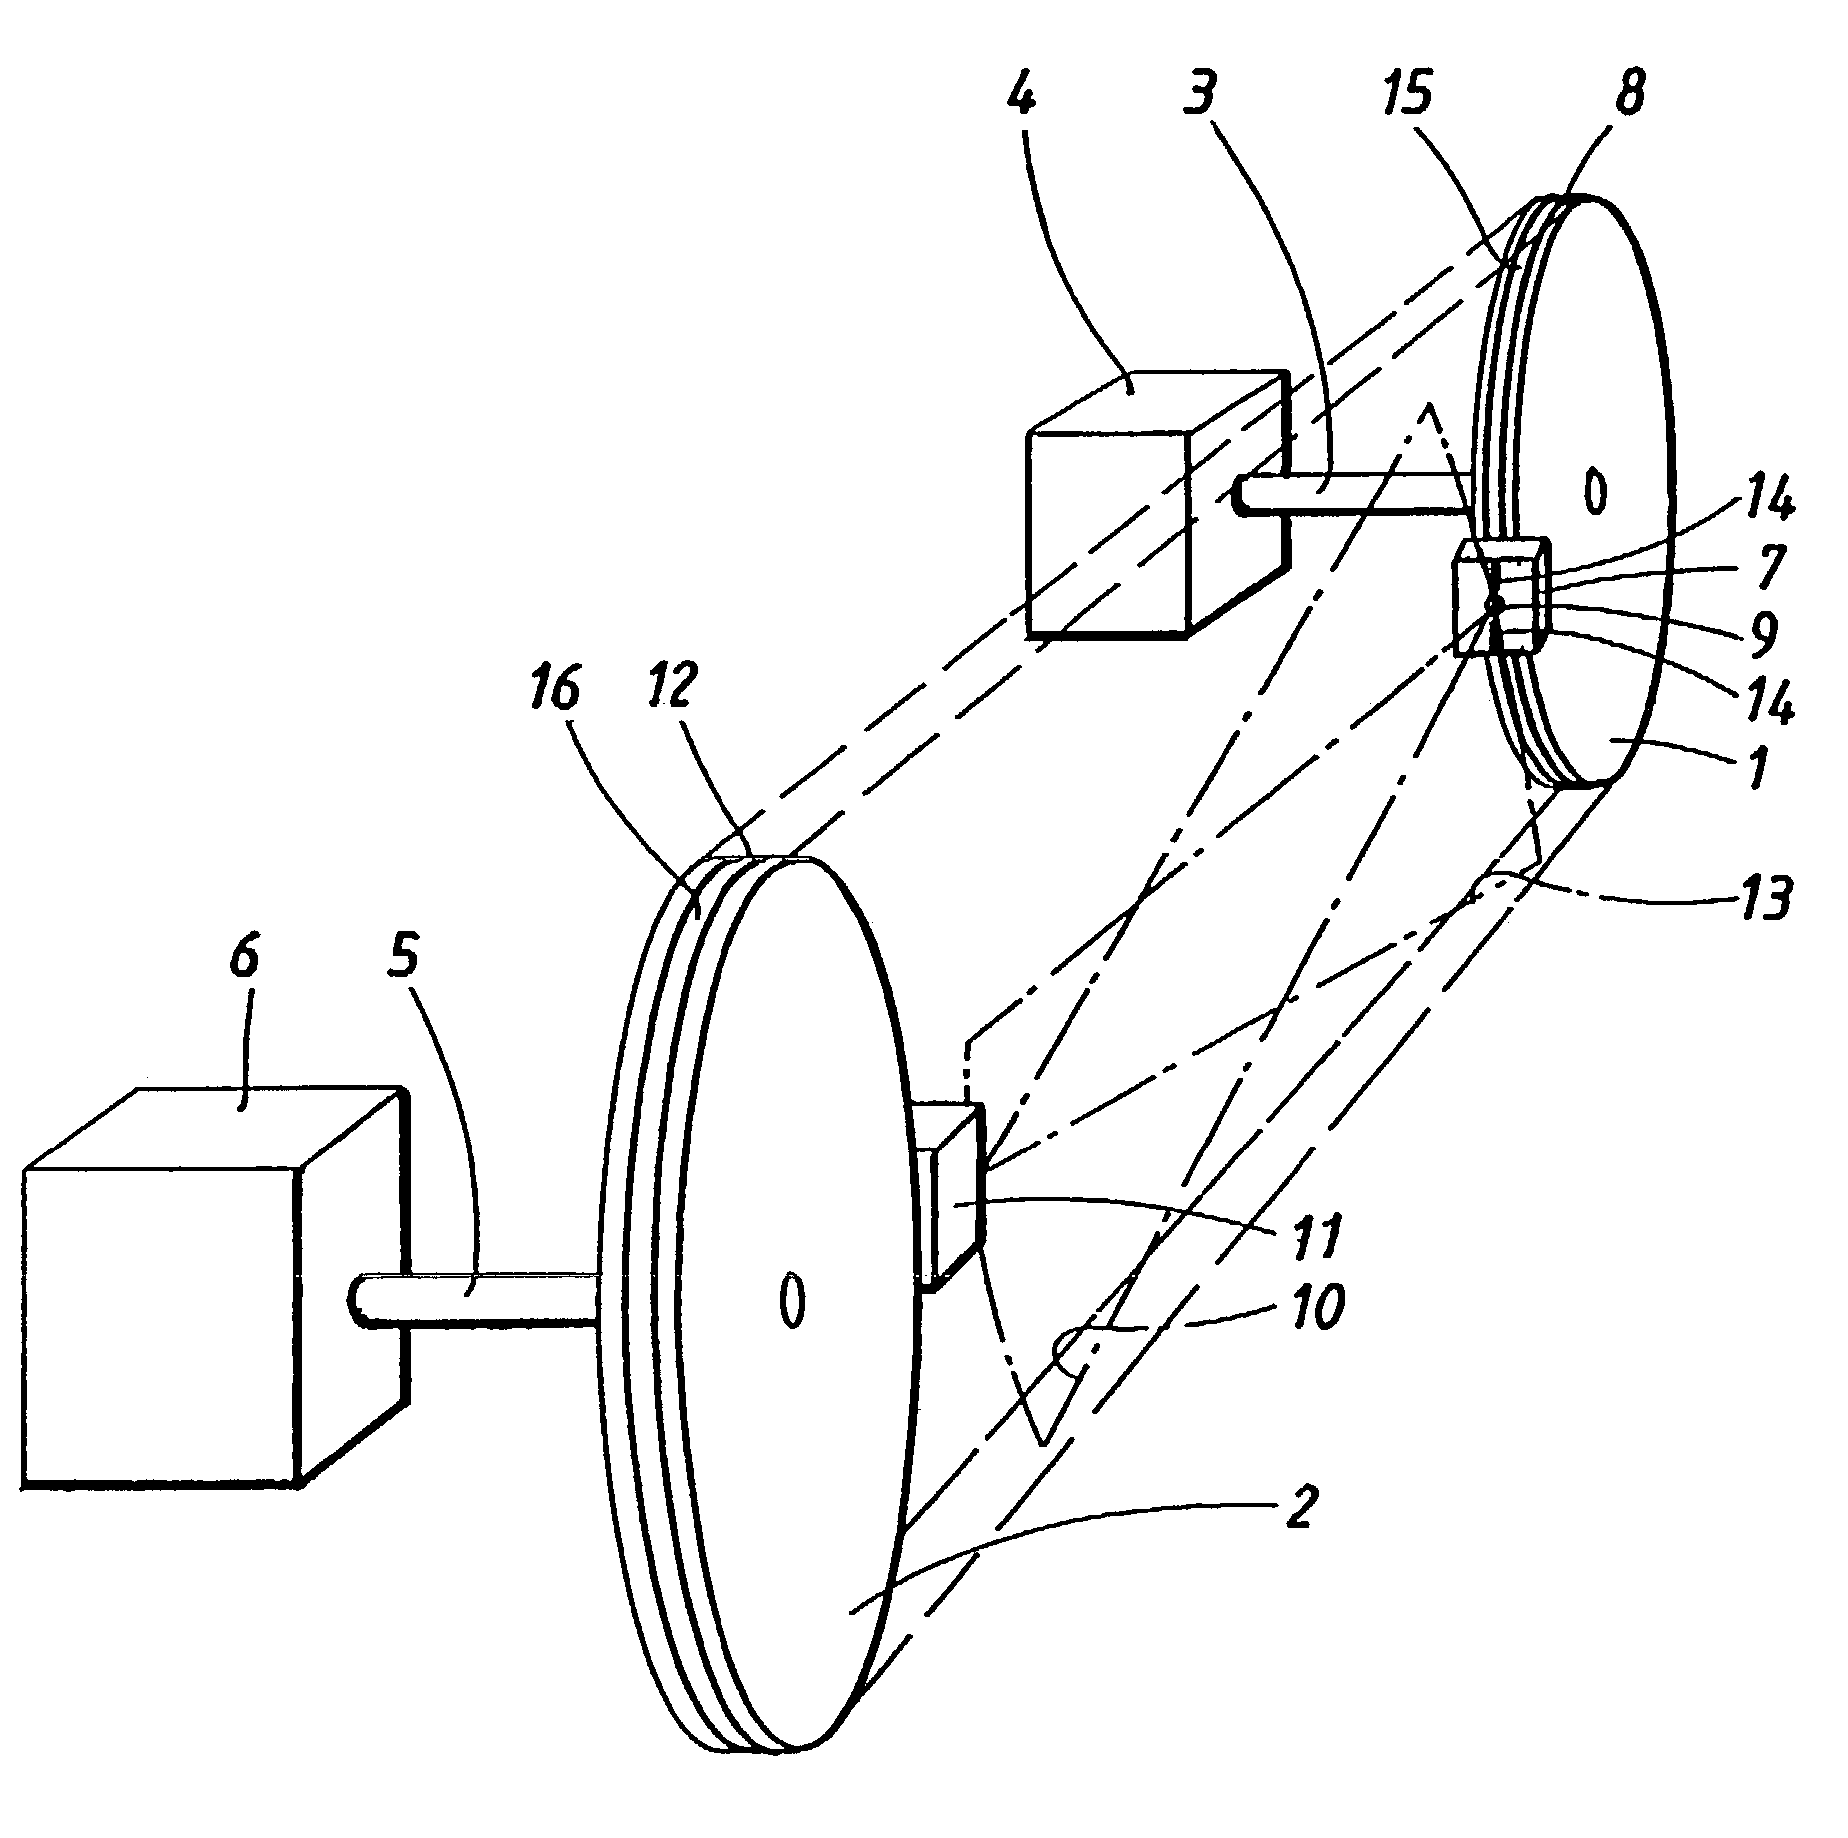 Device and method for alignment of components